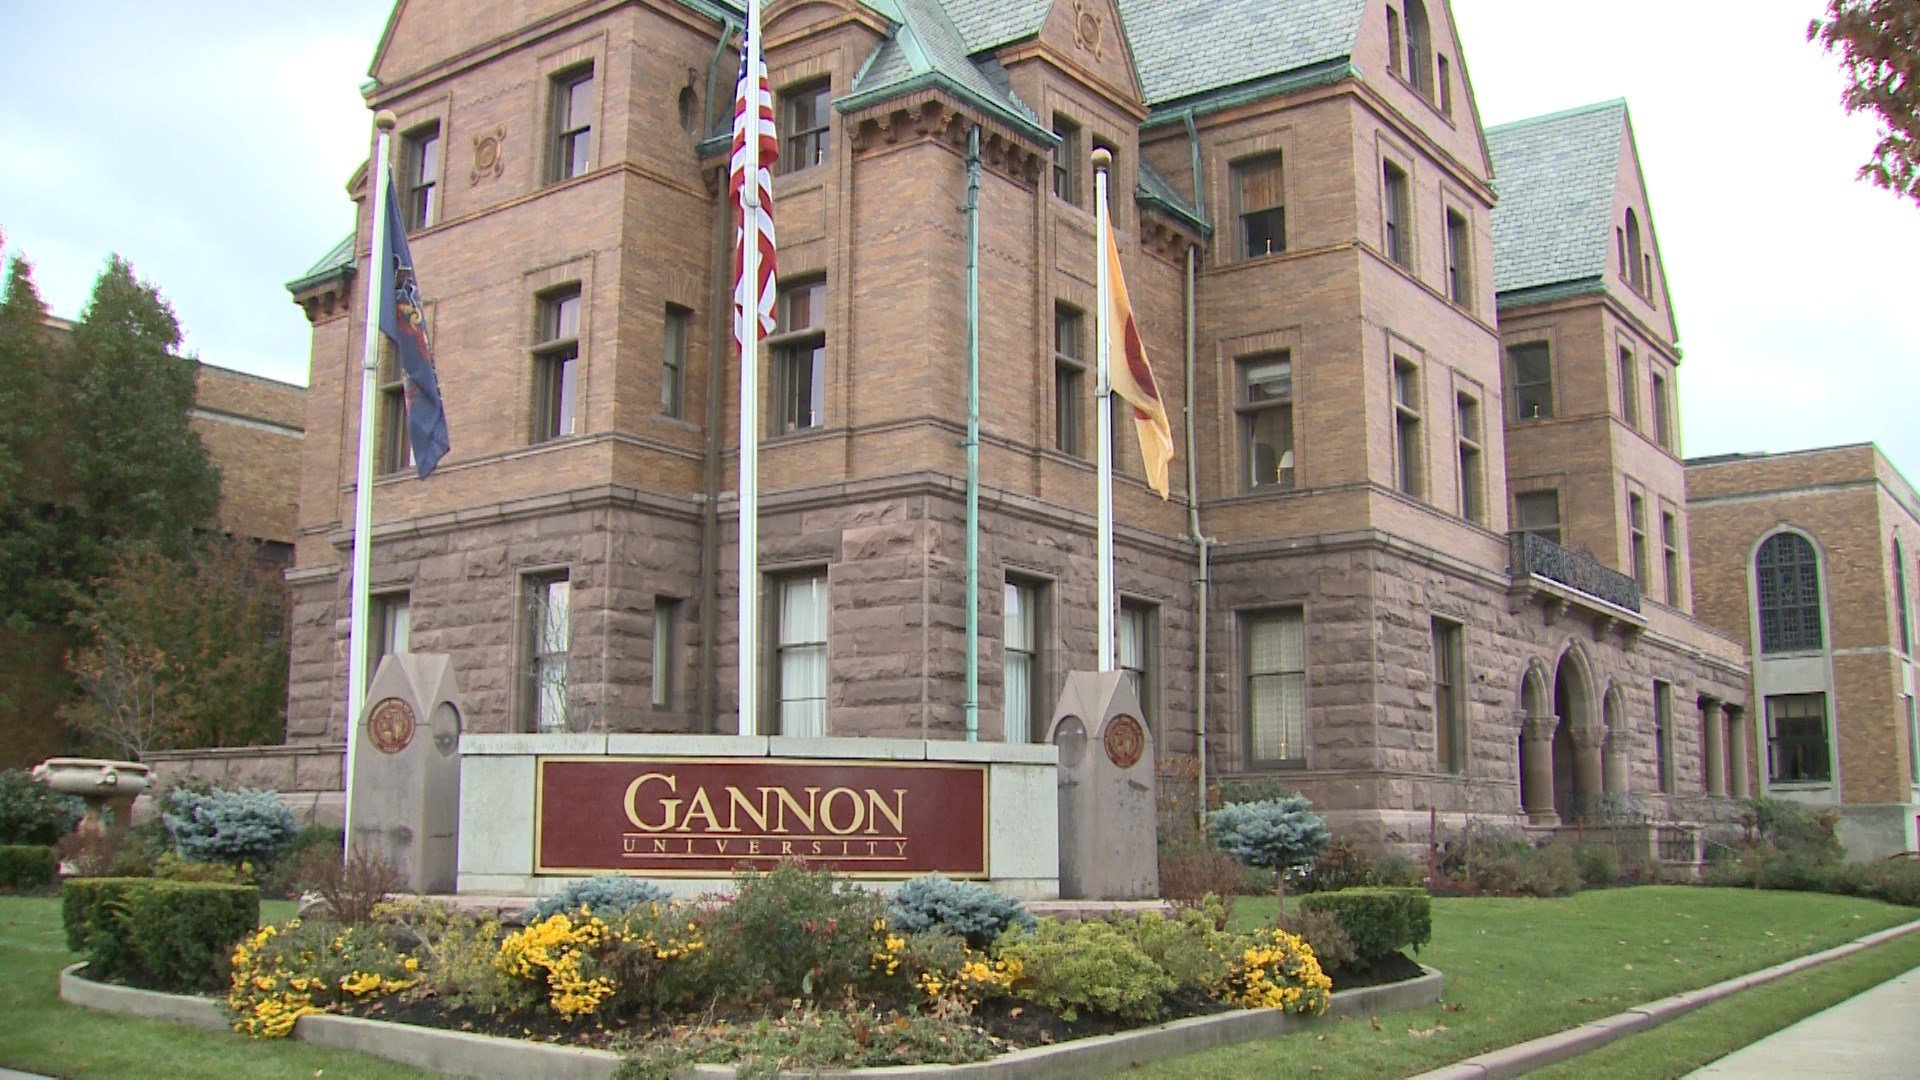 It's On Us PA Awards $40K to Gannon University to Combat Sexual Assault on College Campuses